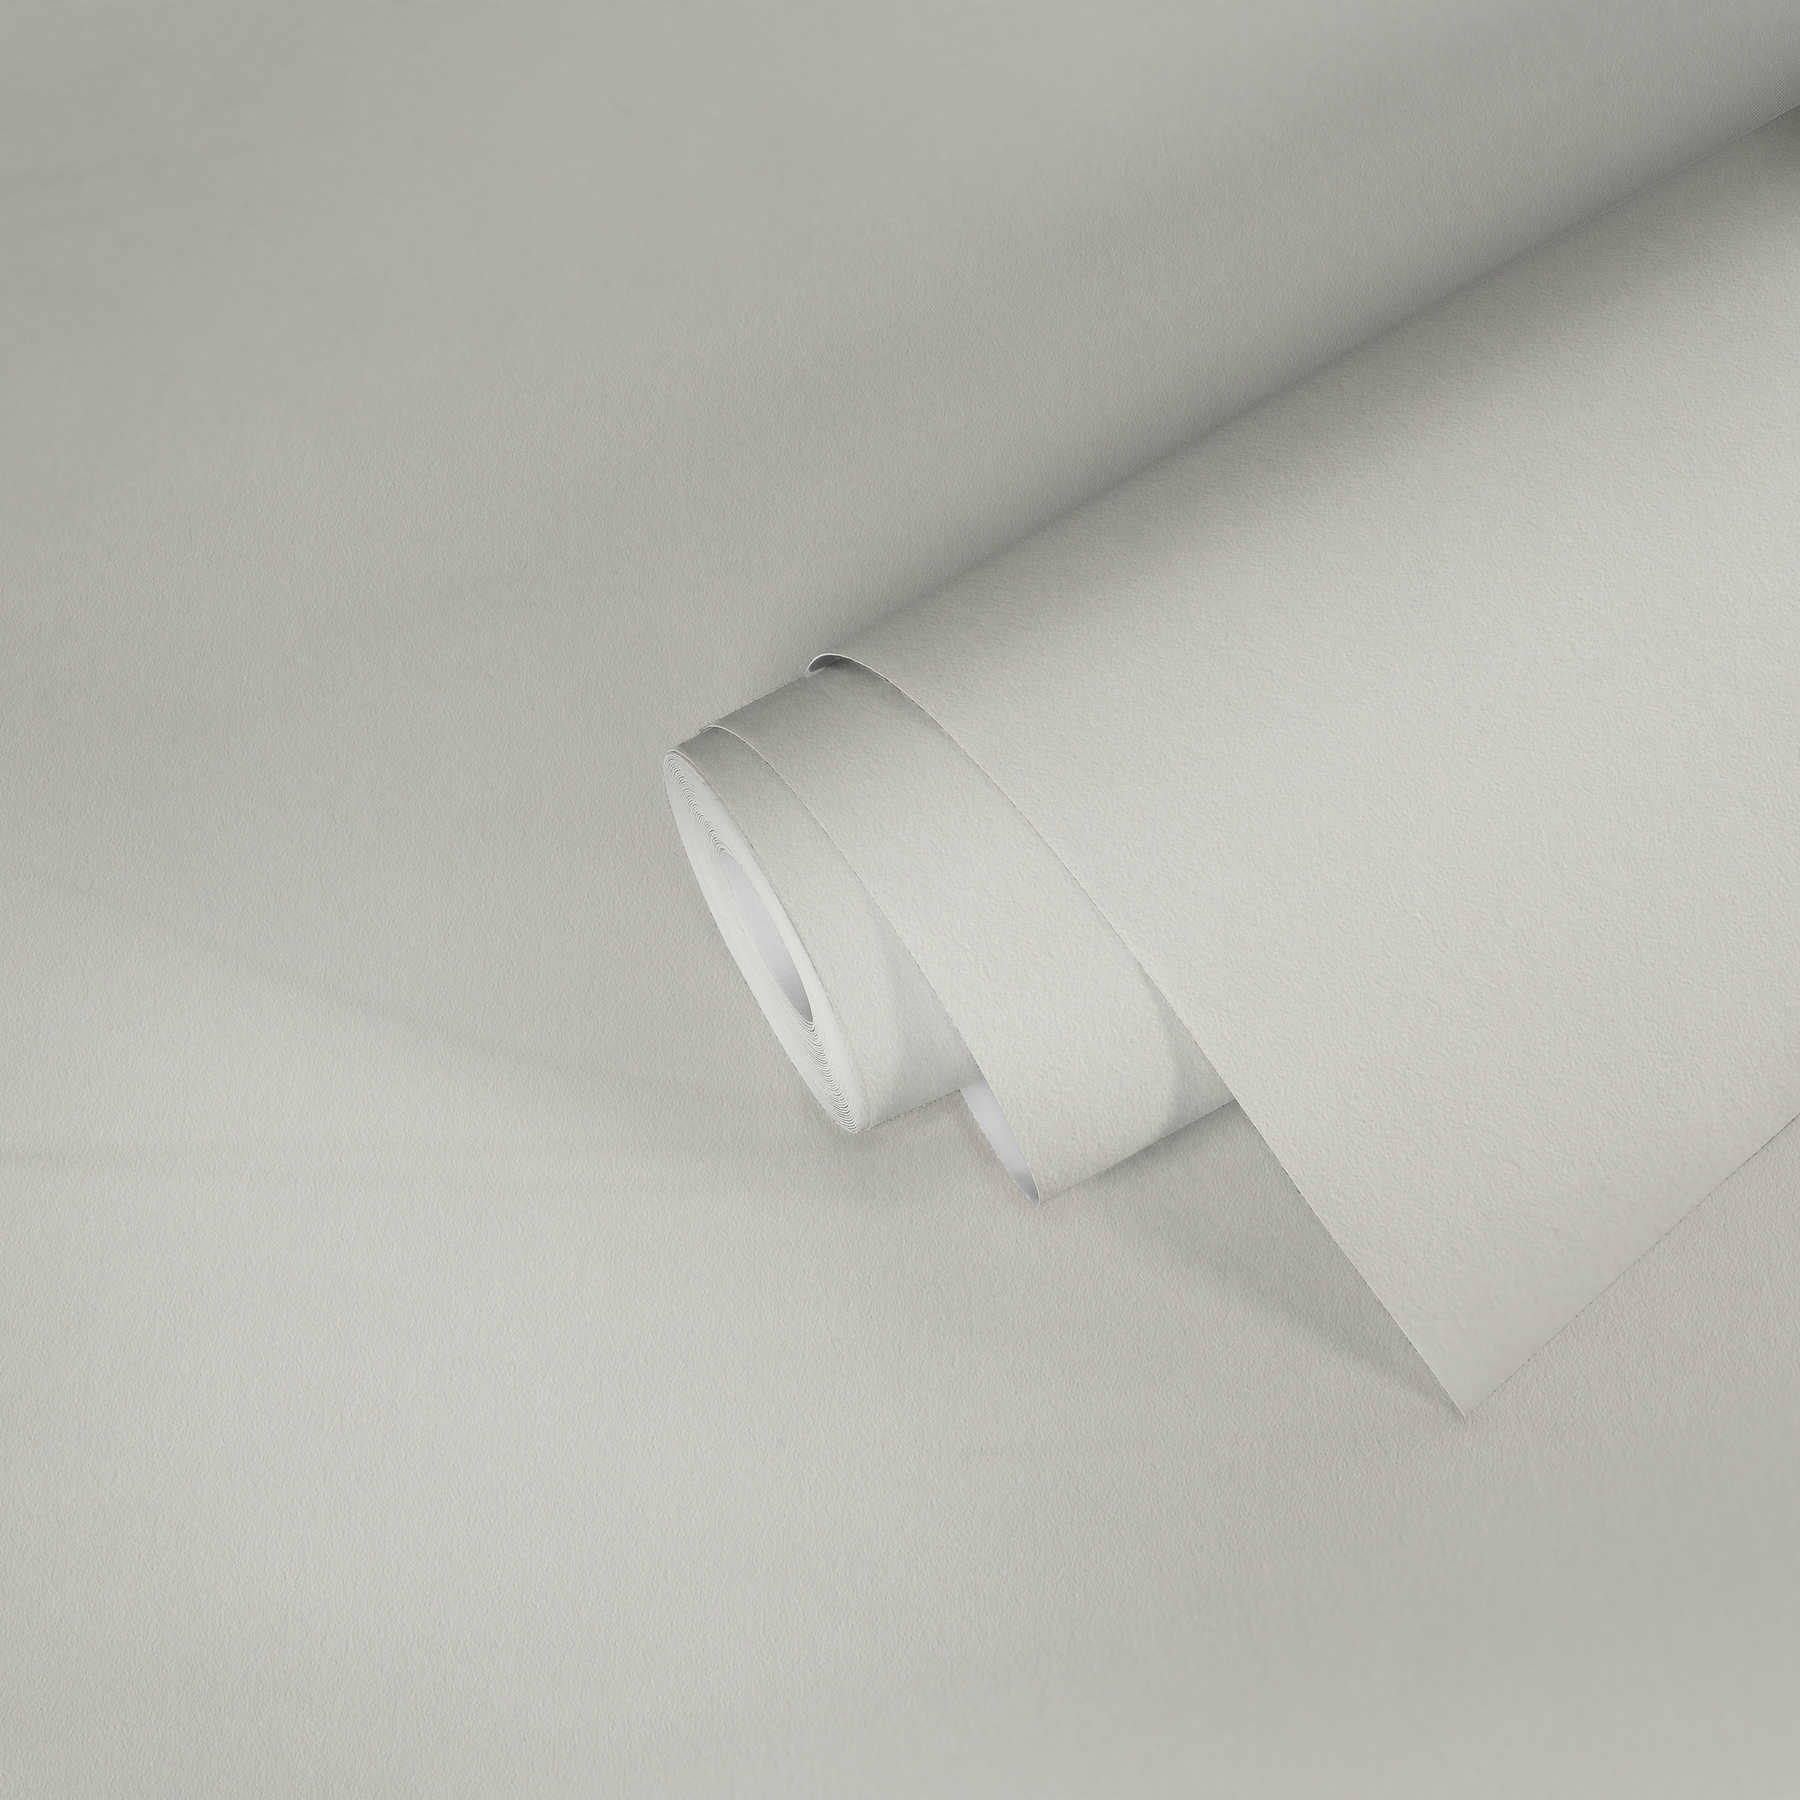             Glass fleece pre-painted - glass fibre wallpaper with fleece structure - white pigmented
        